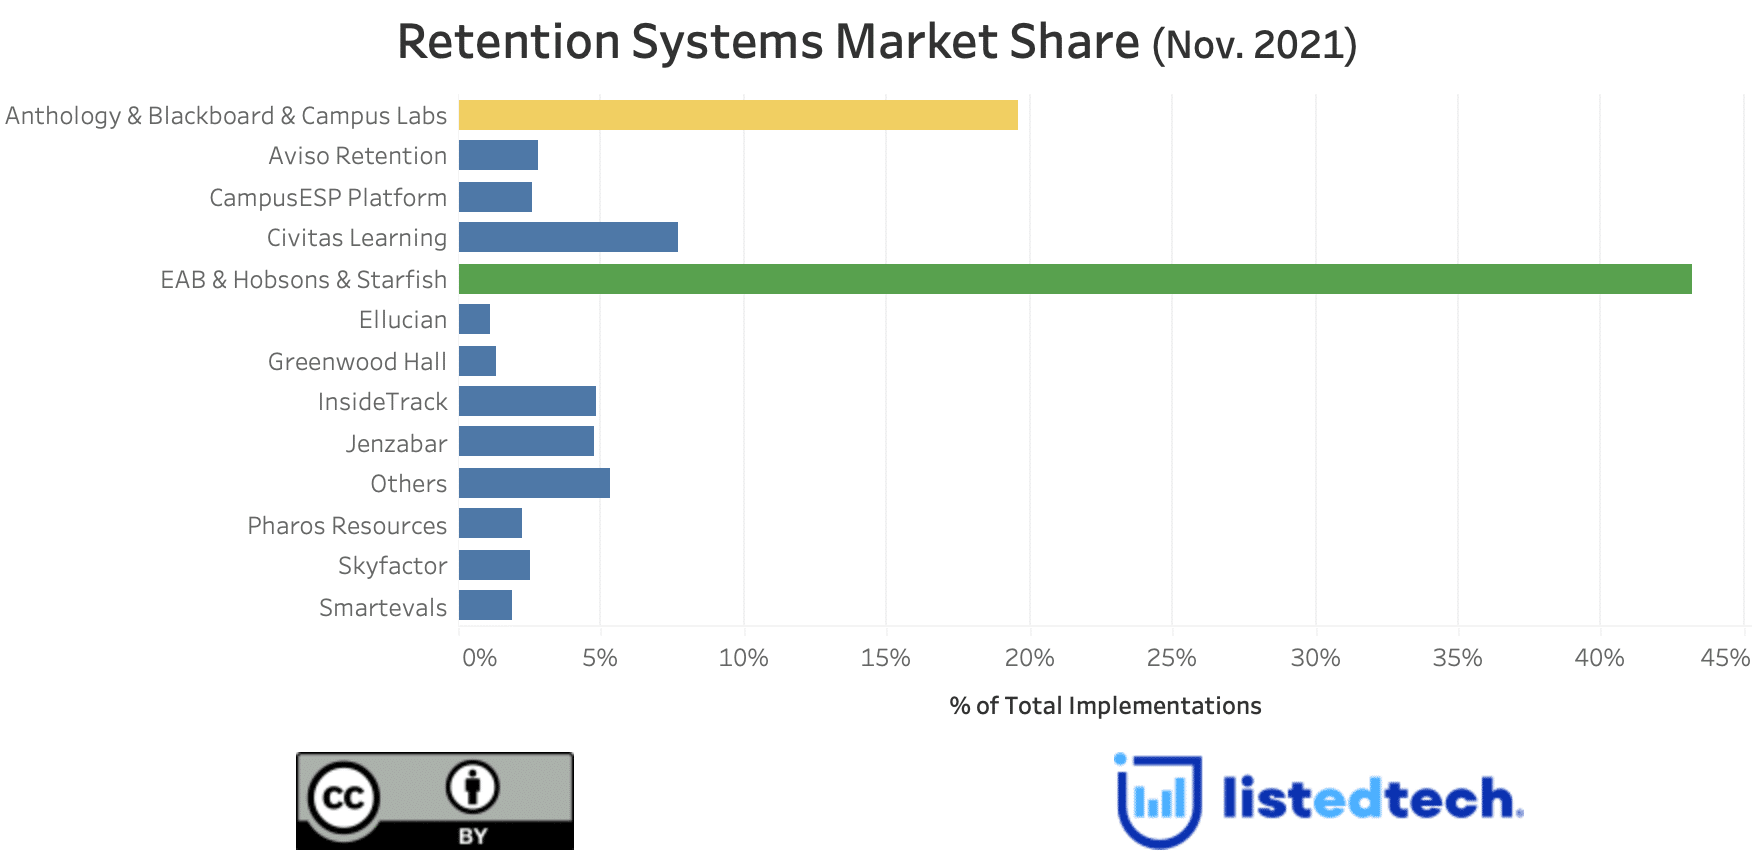 Retention Systems Used in Higher Education - LISTedTECH